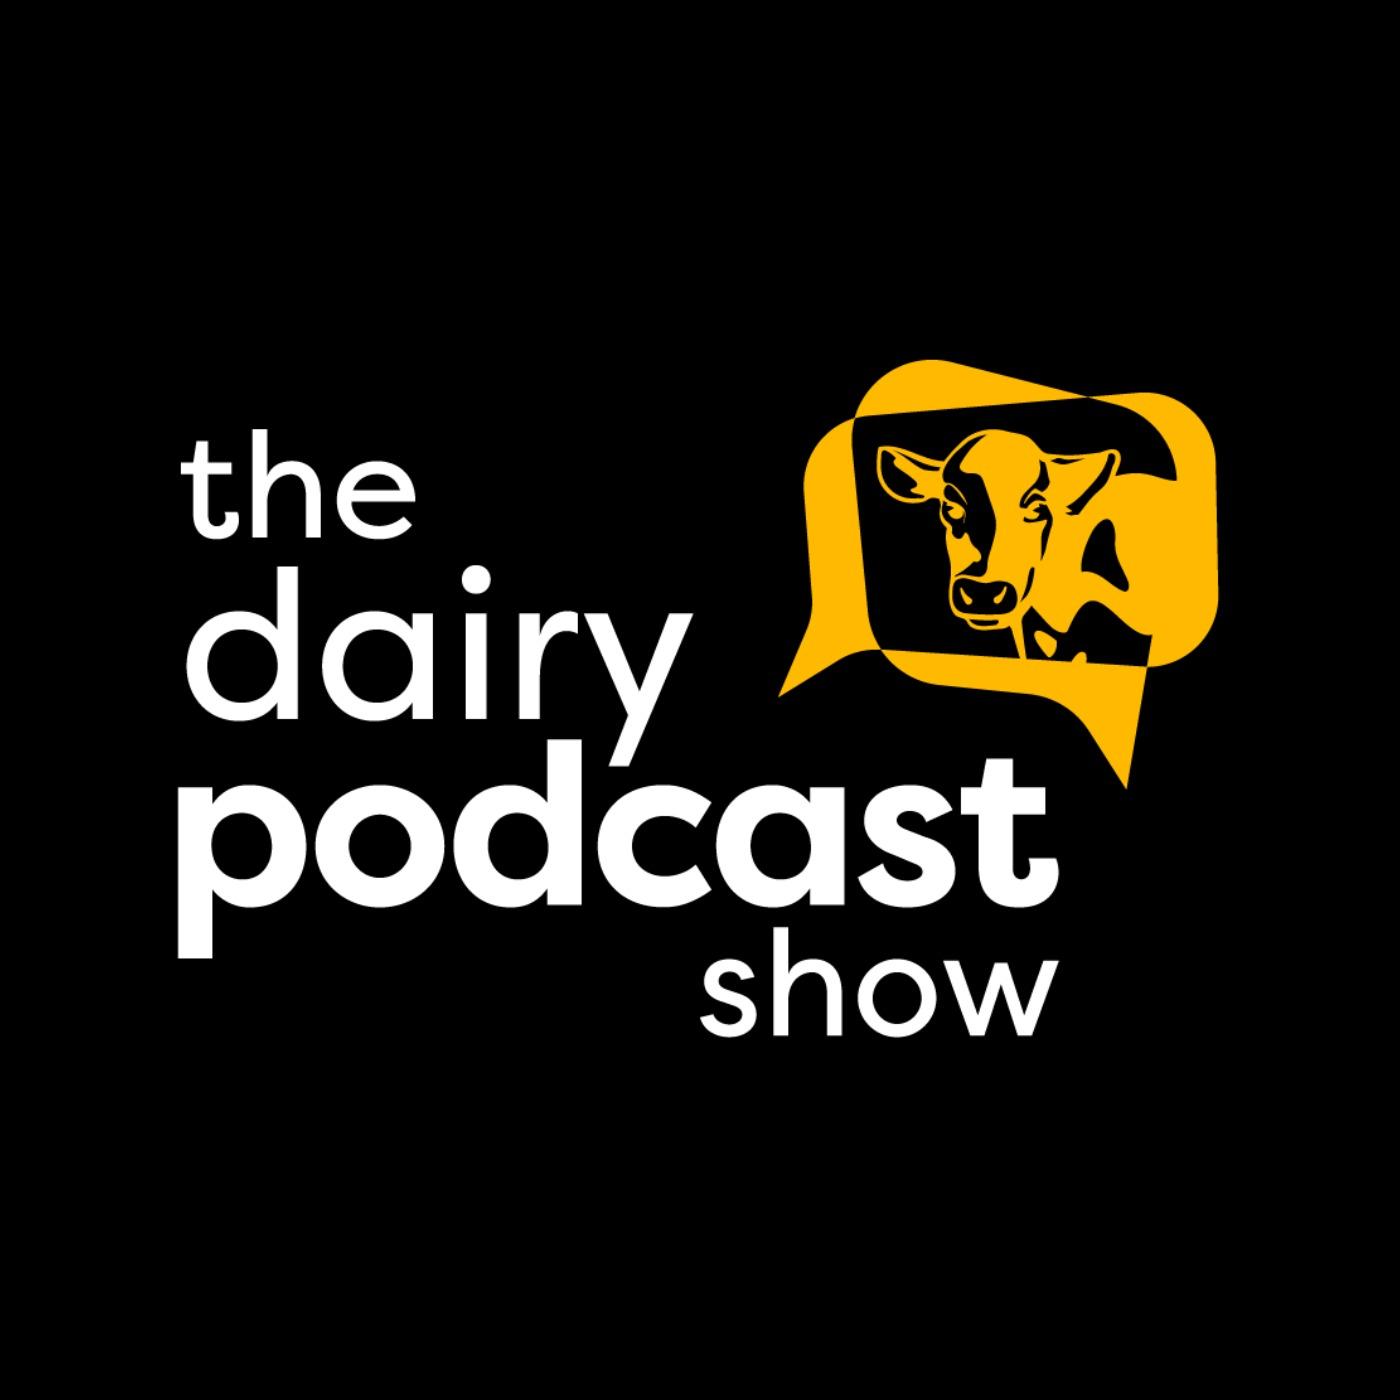 The Dairy Podcast Show